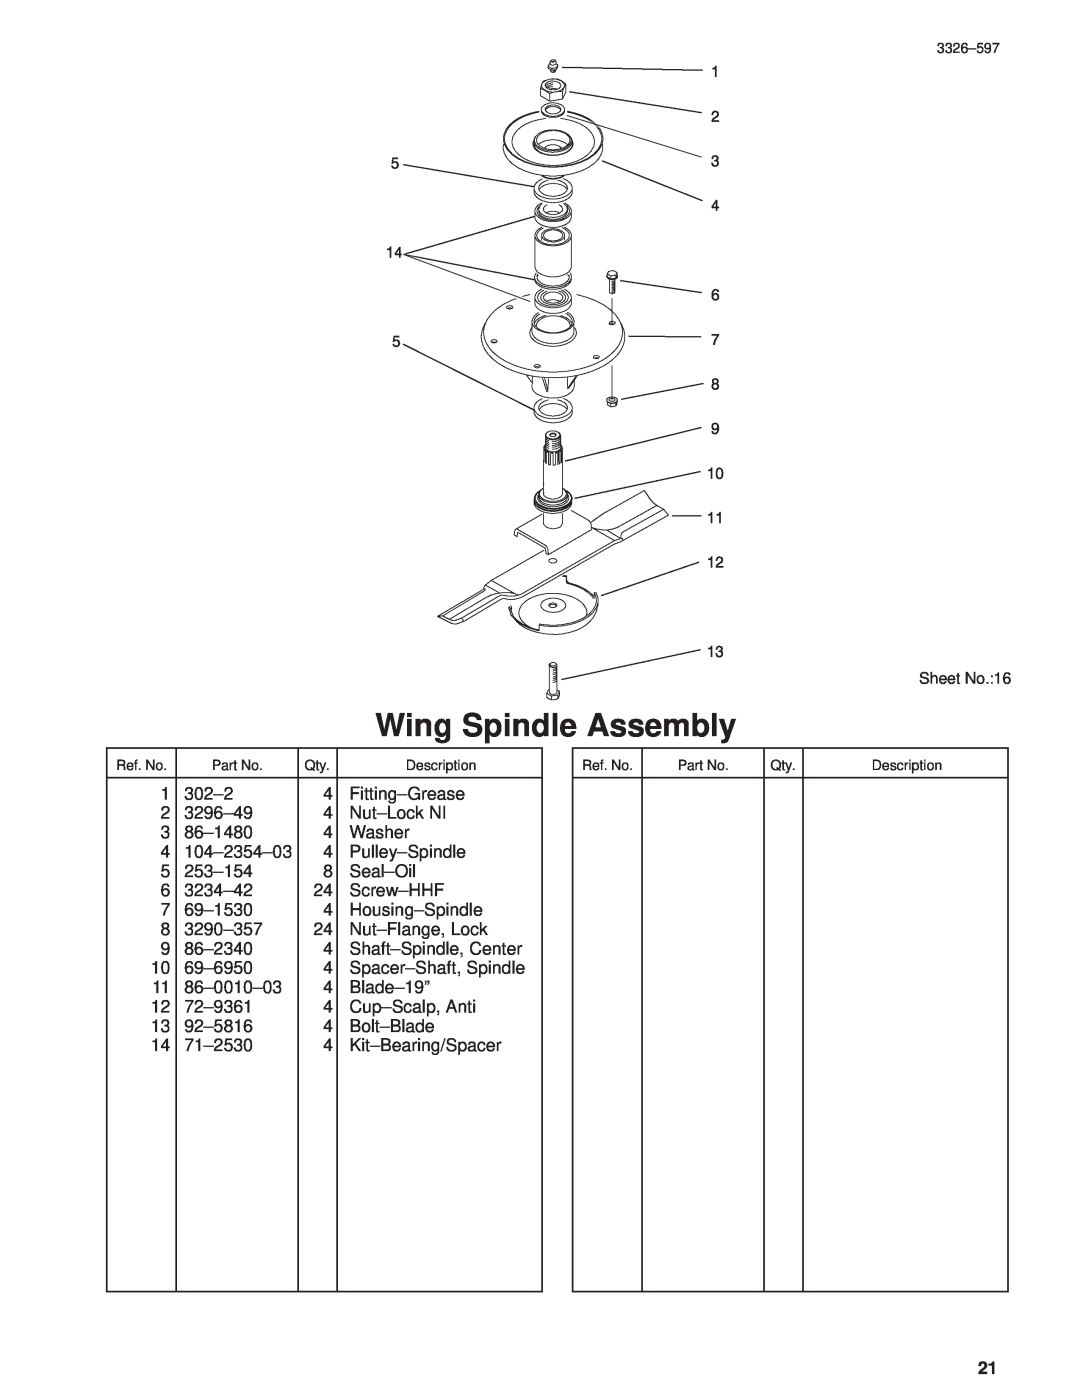 Toro 30402210000001 and Up manual Wing Spindle Assembly, Sheet No.16 